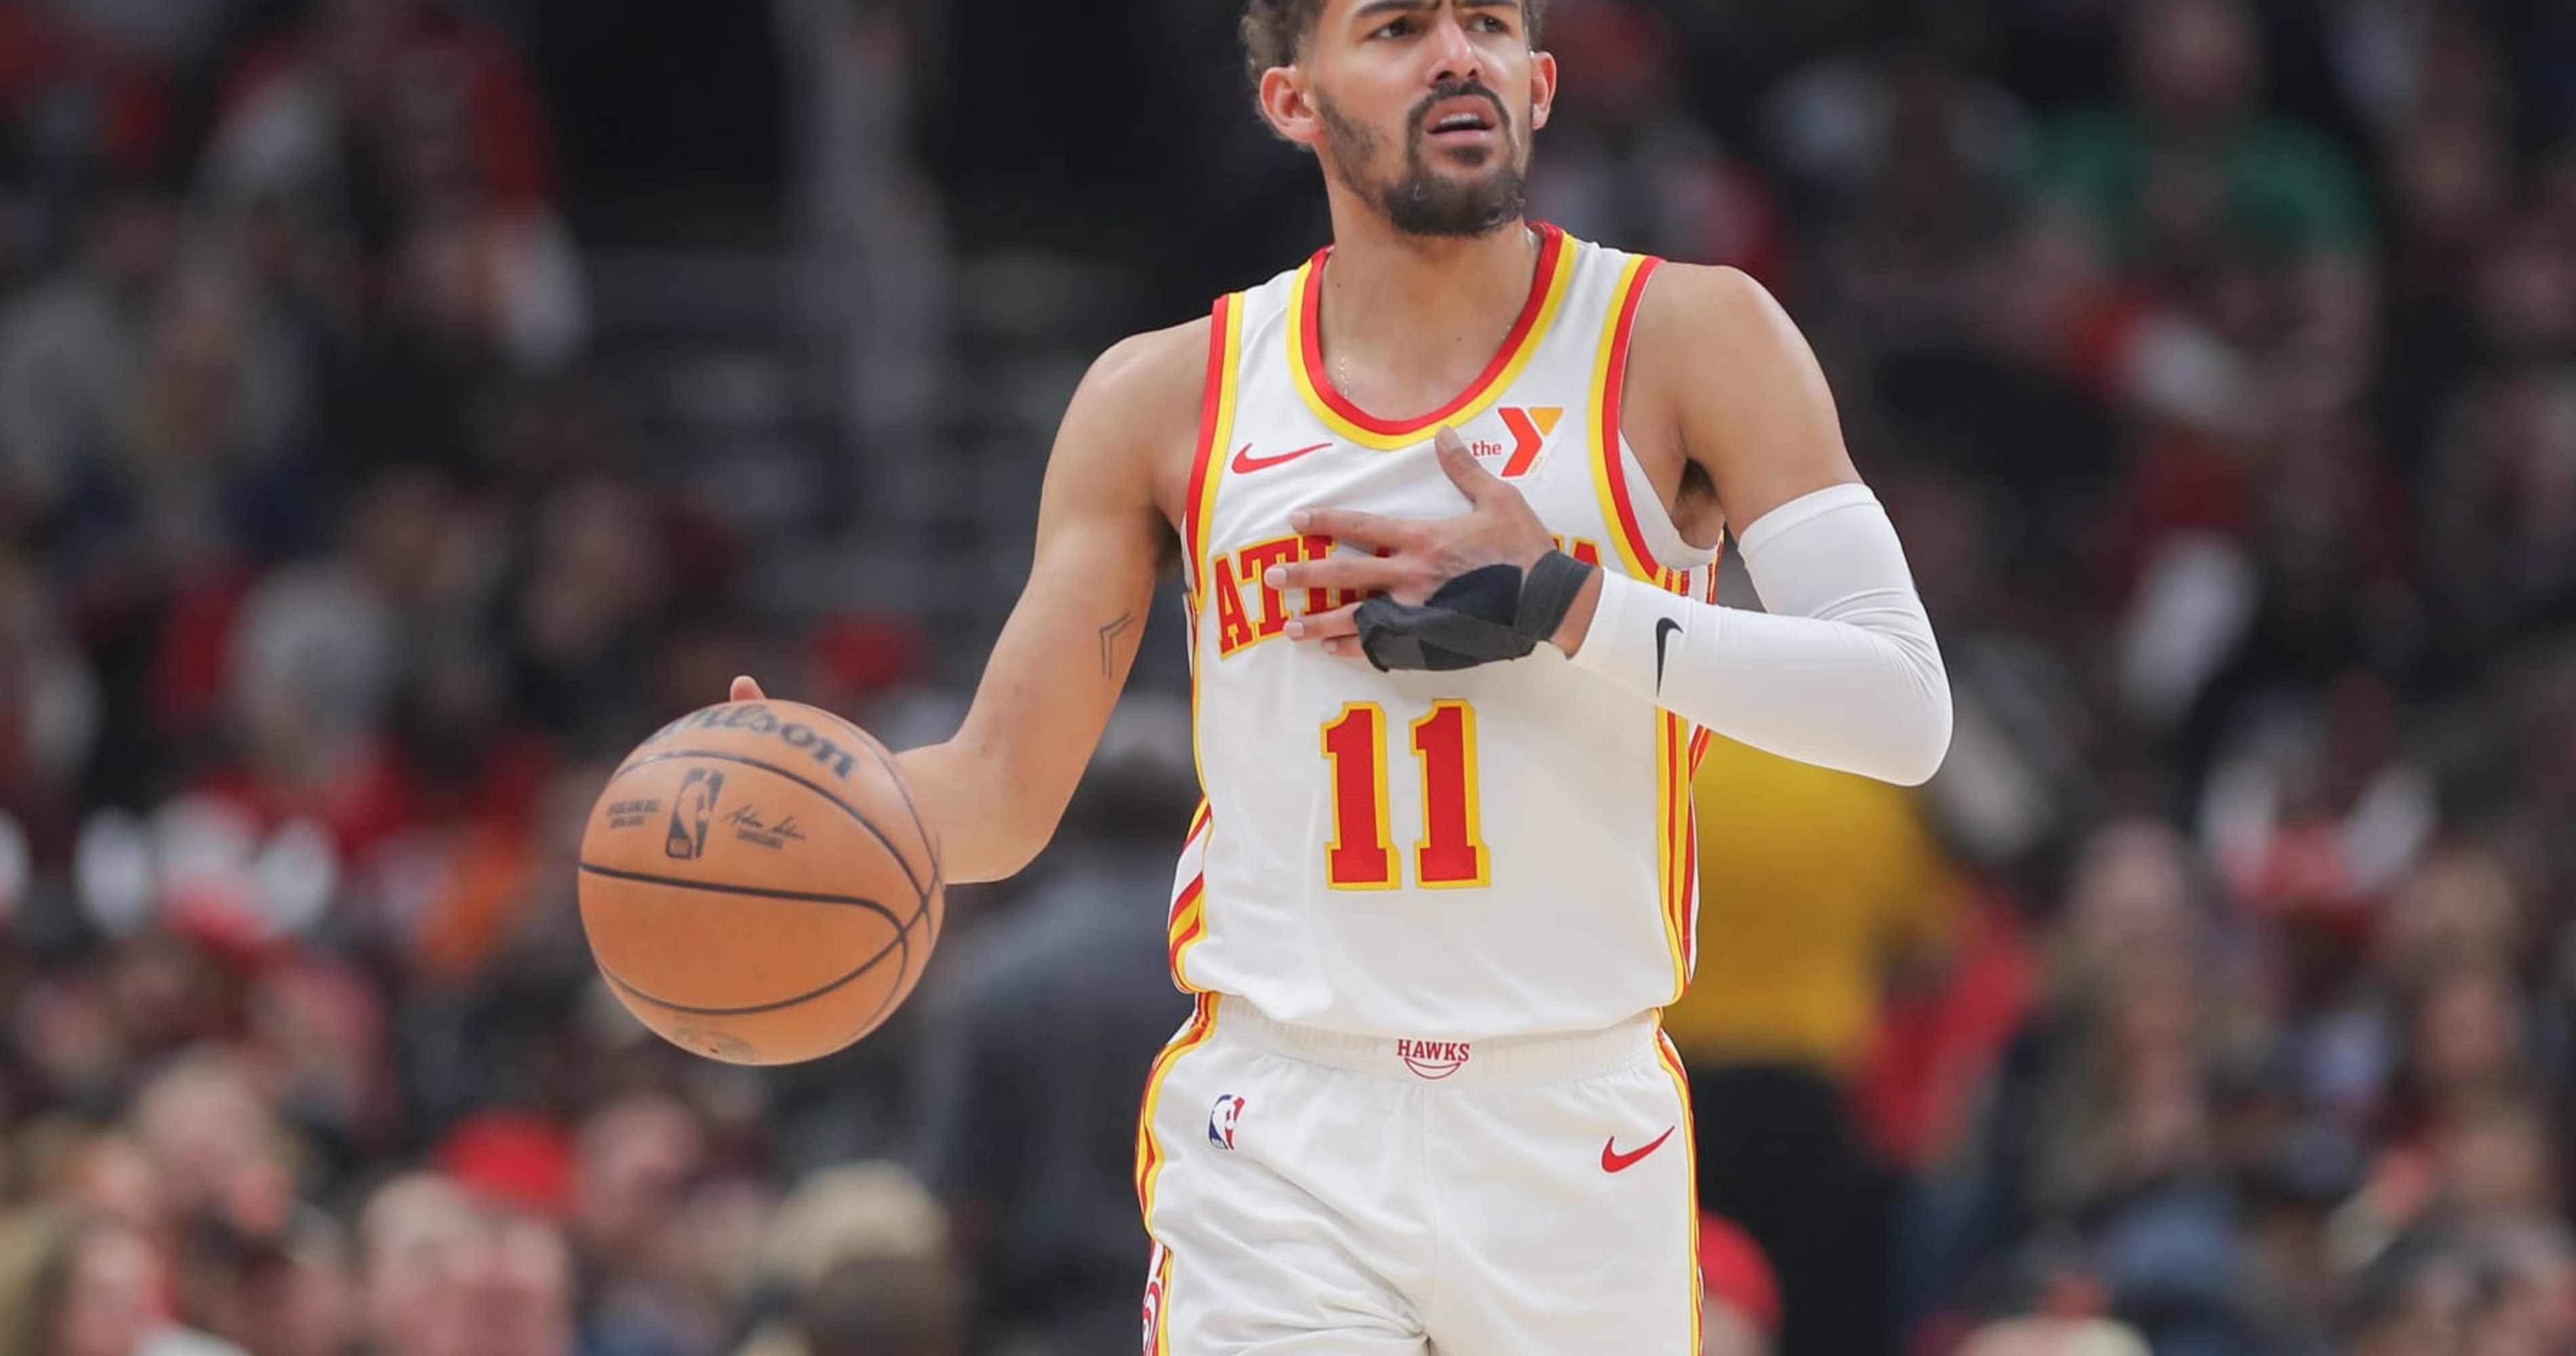 NBA Trade Rumors: Trae Young Deal Discussed by Jazz, Hawks amid Lauri Markkanen Buzz